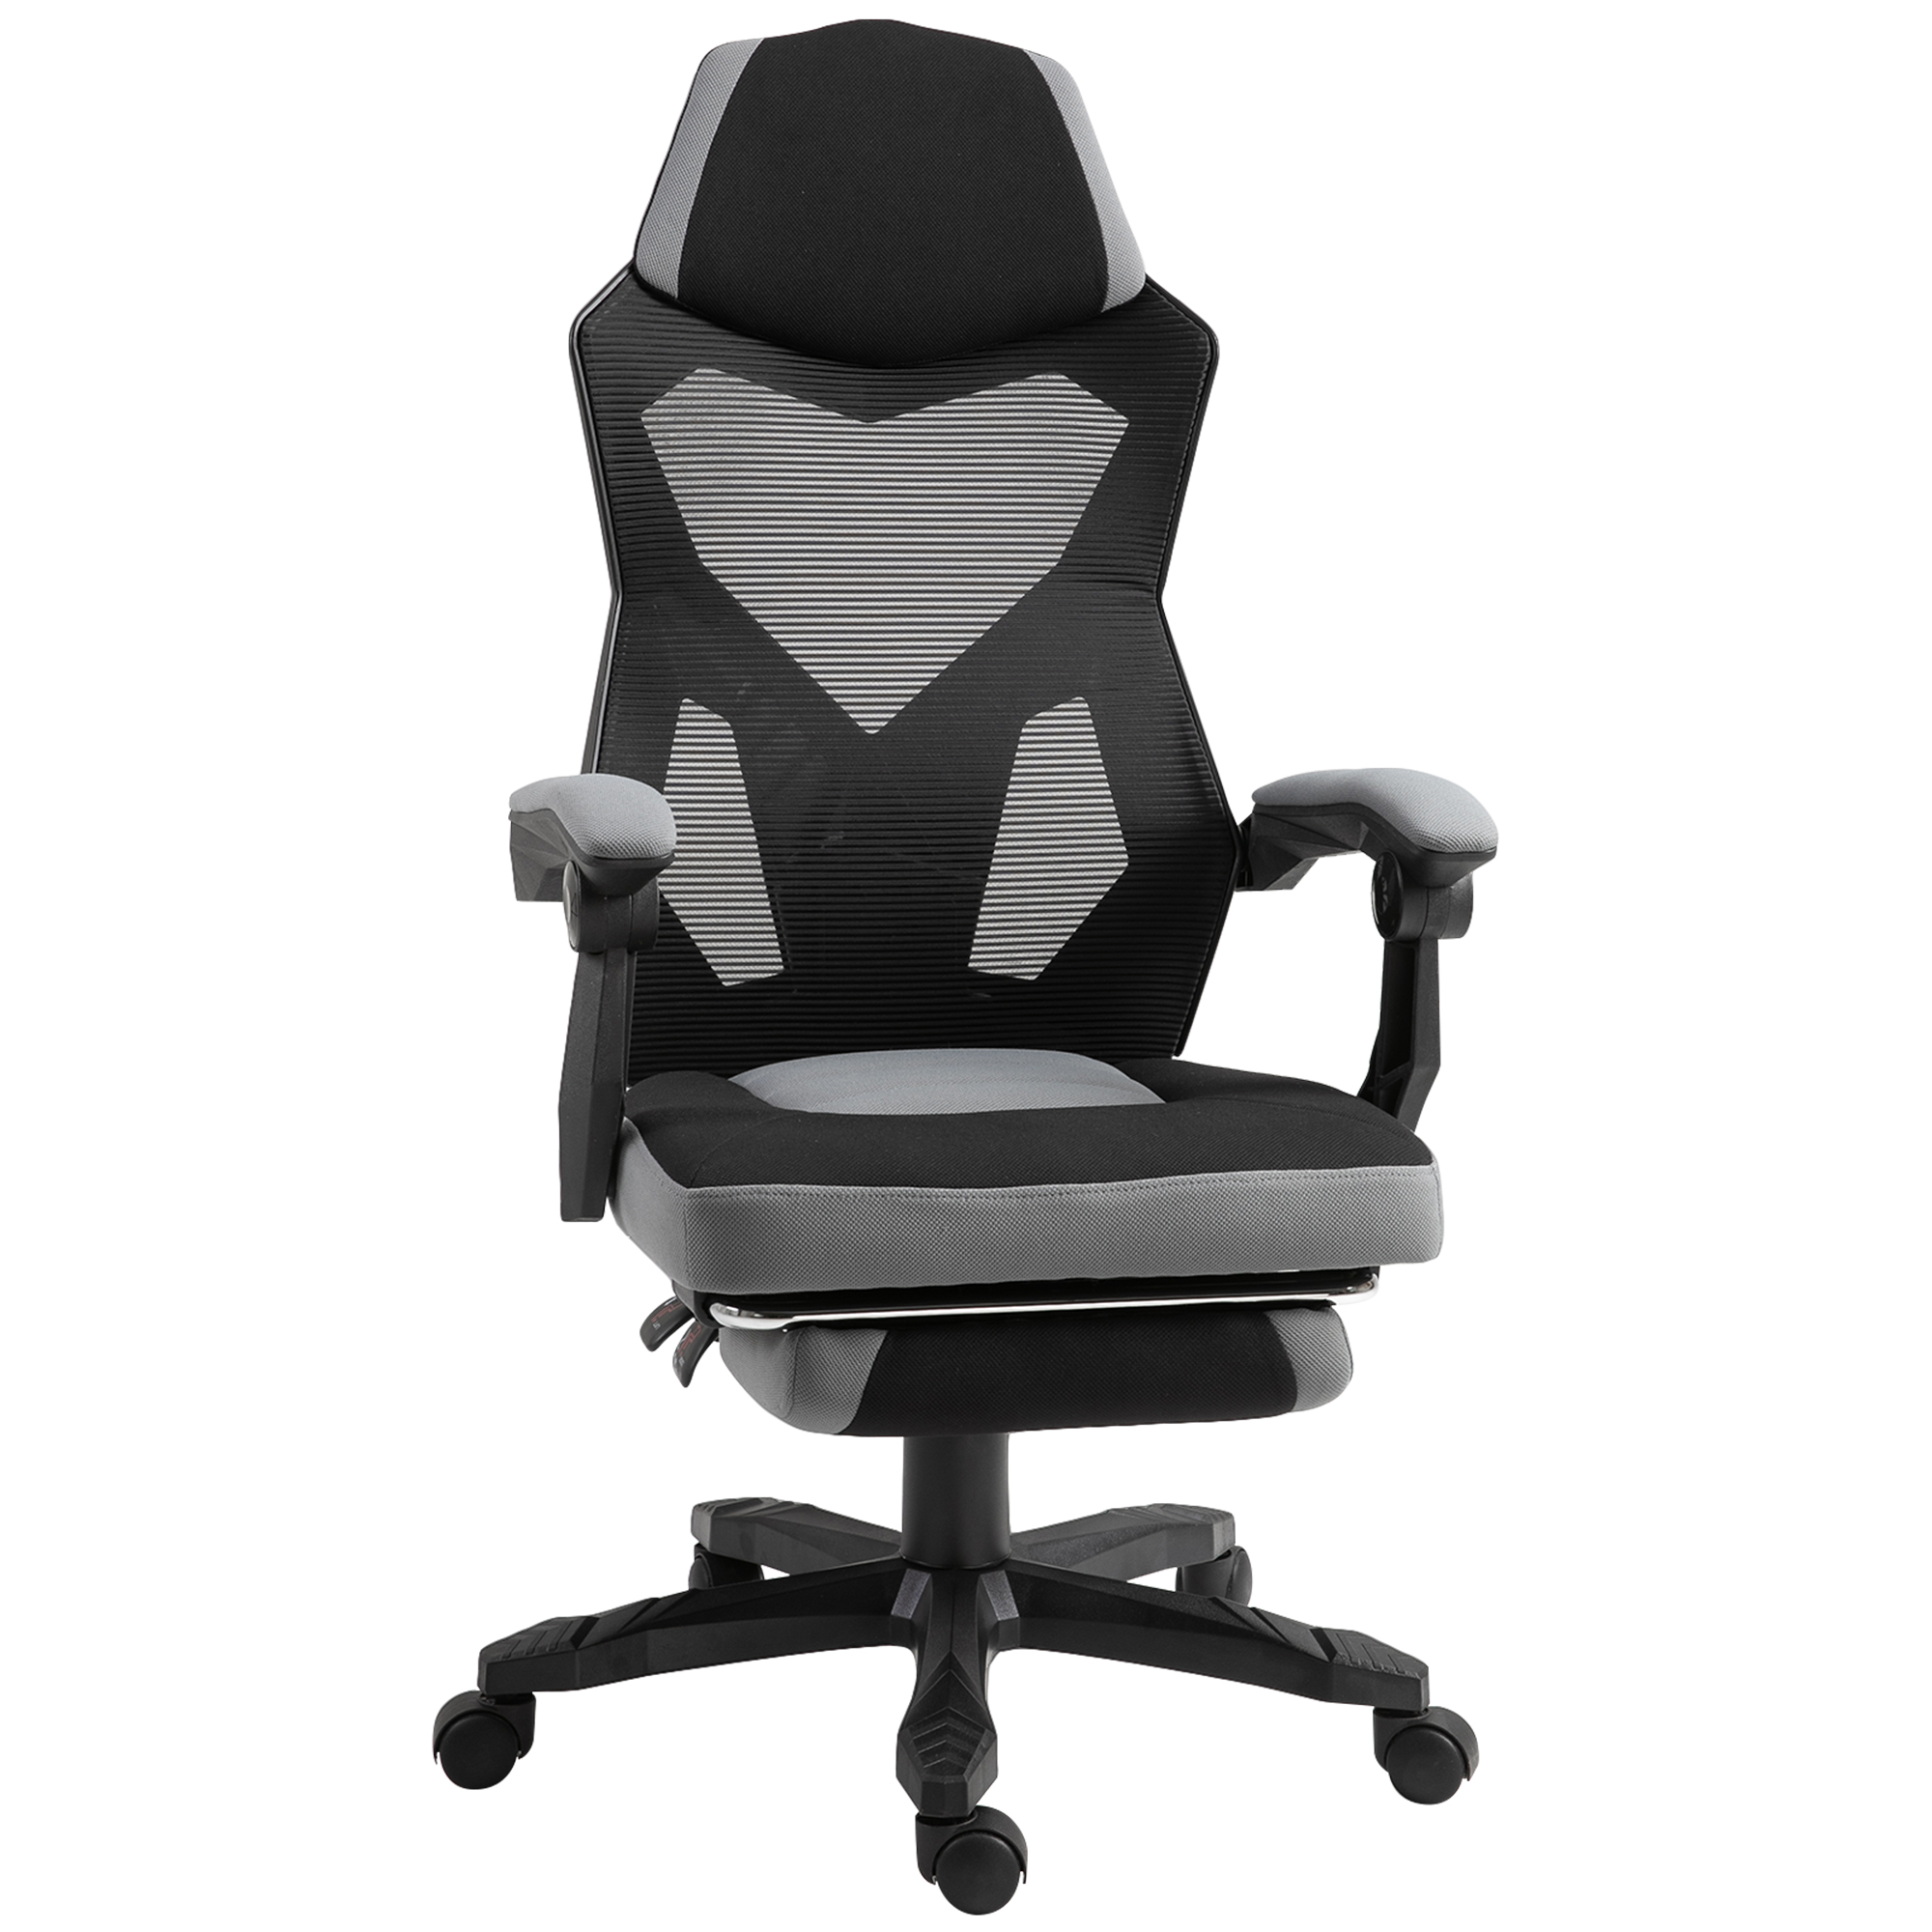 HOMCOM Fauteuil gaming militaire - chaise gamer - inclinable